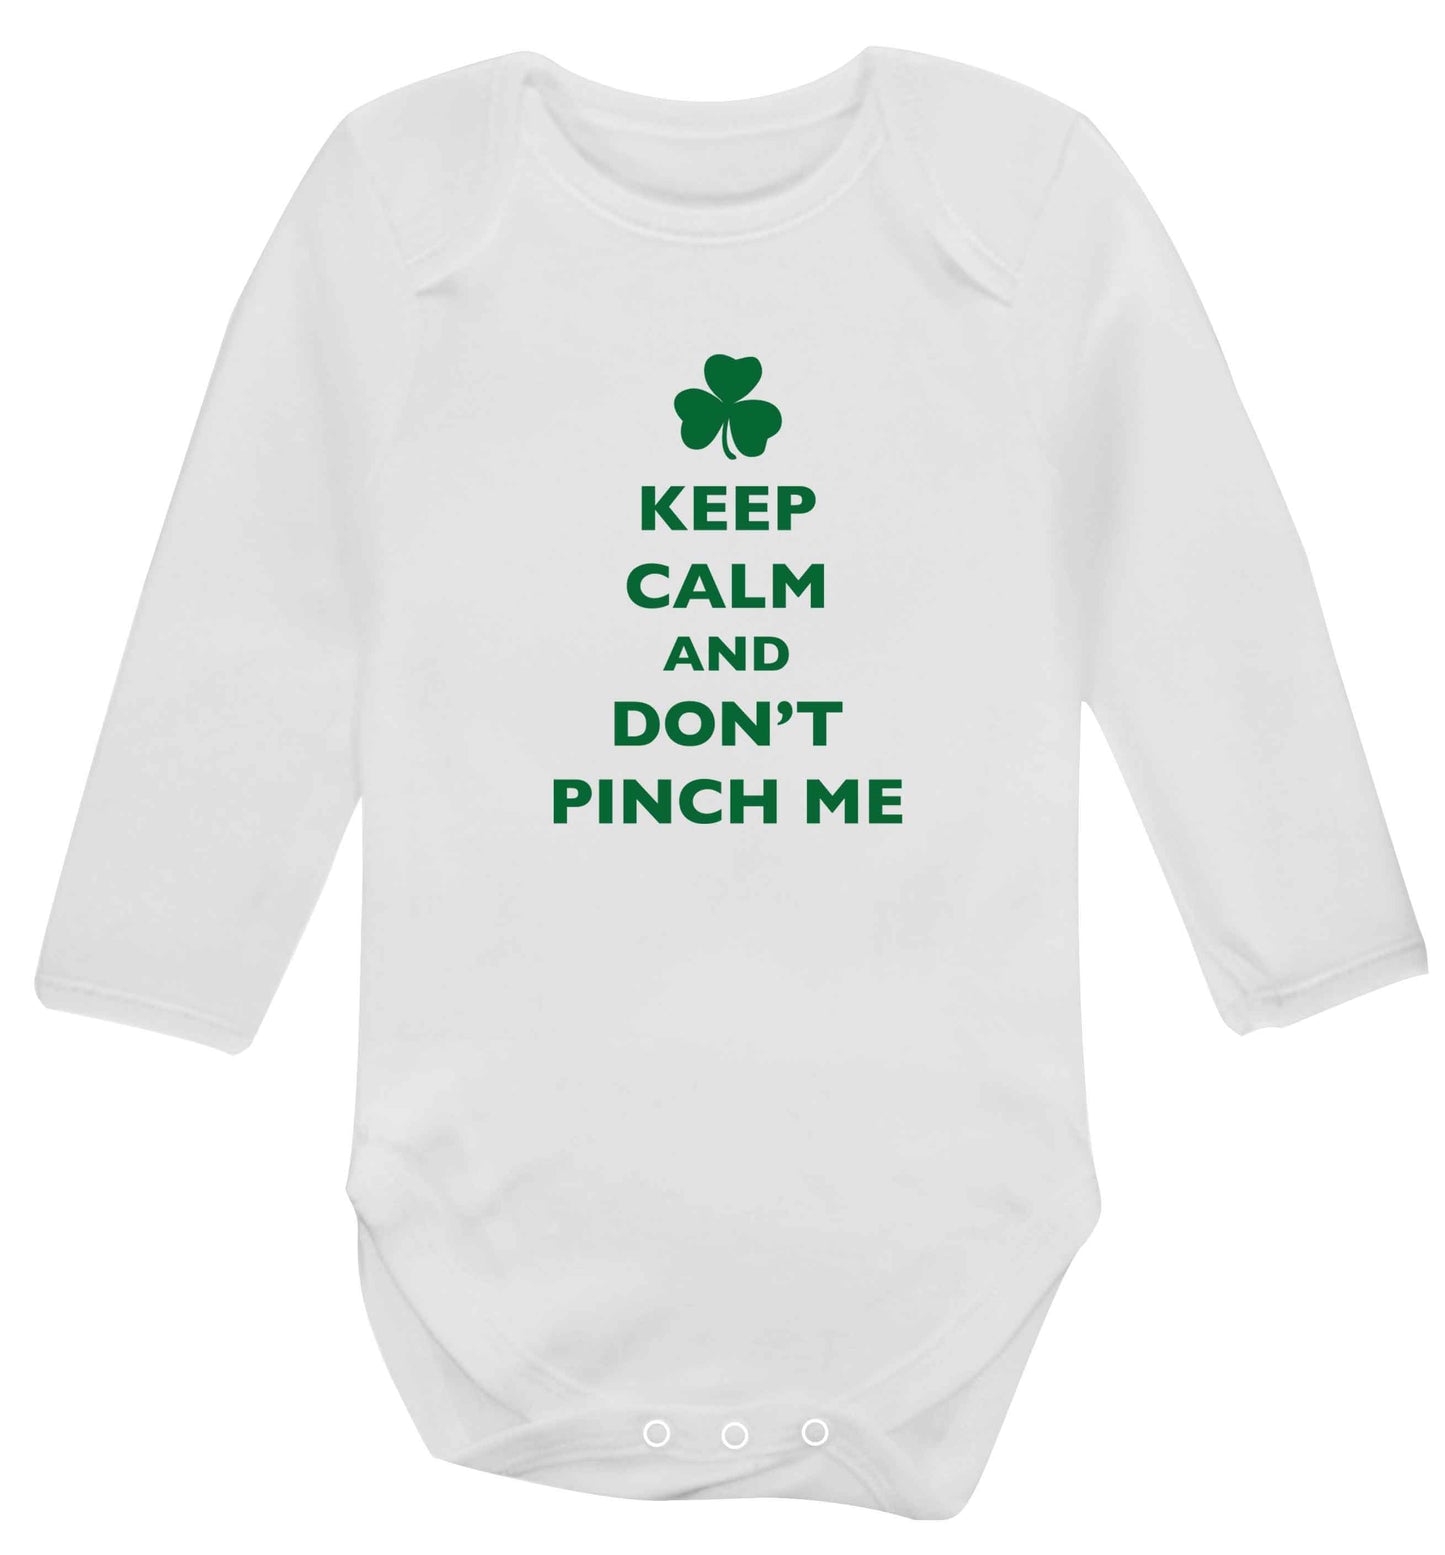 Keep calm and don't pinch me baby vest long sleeved white 6-12 months